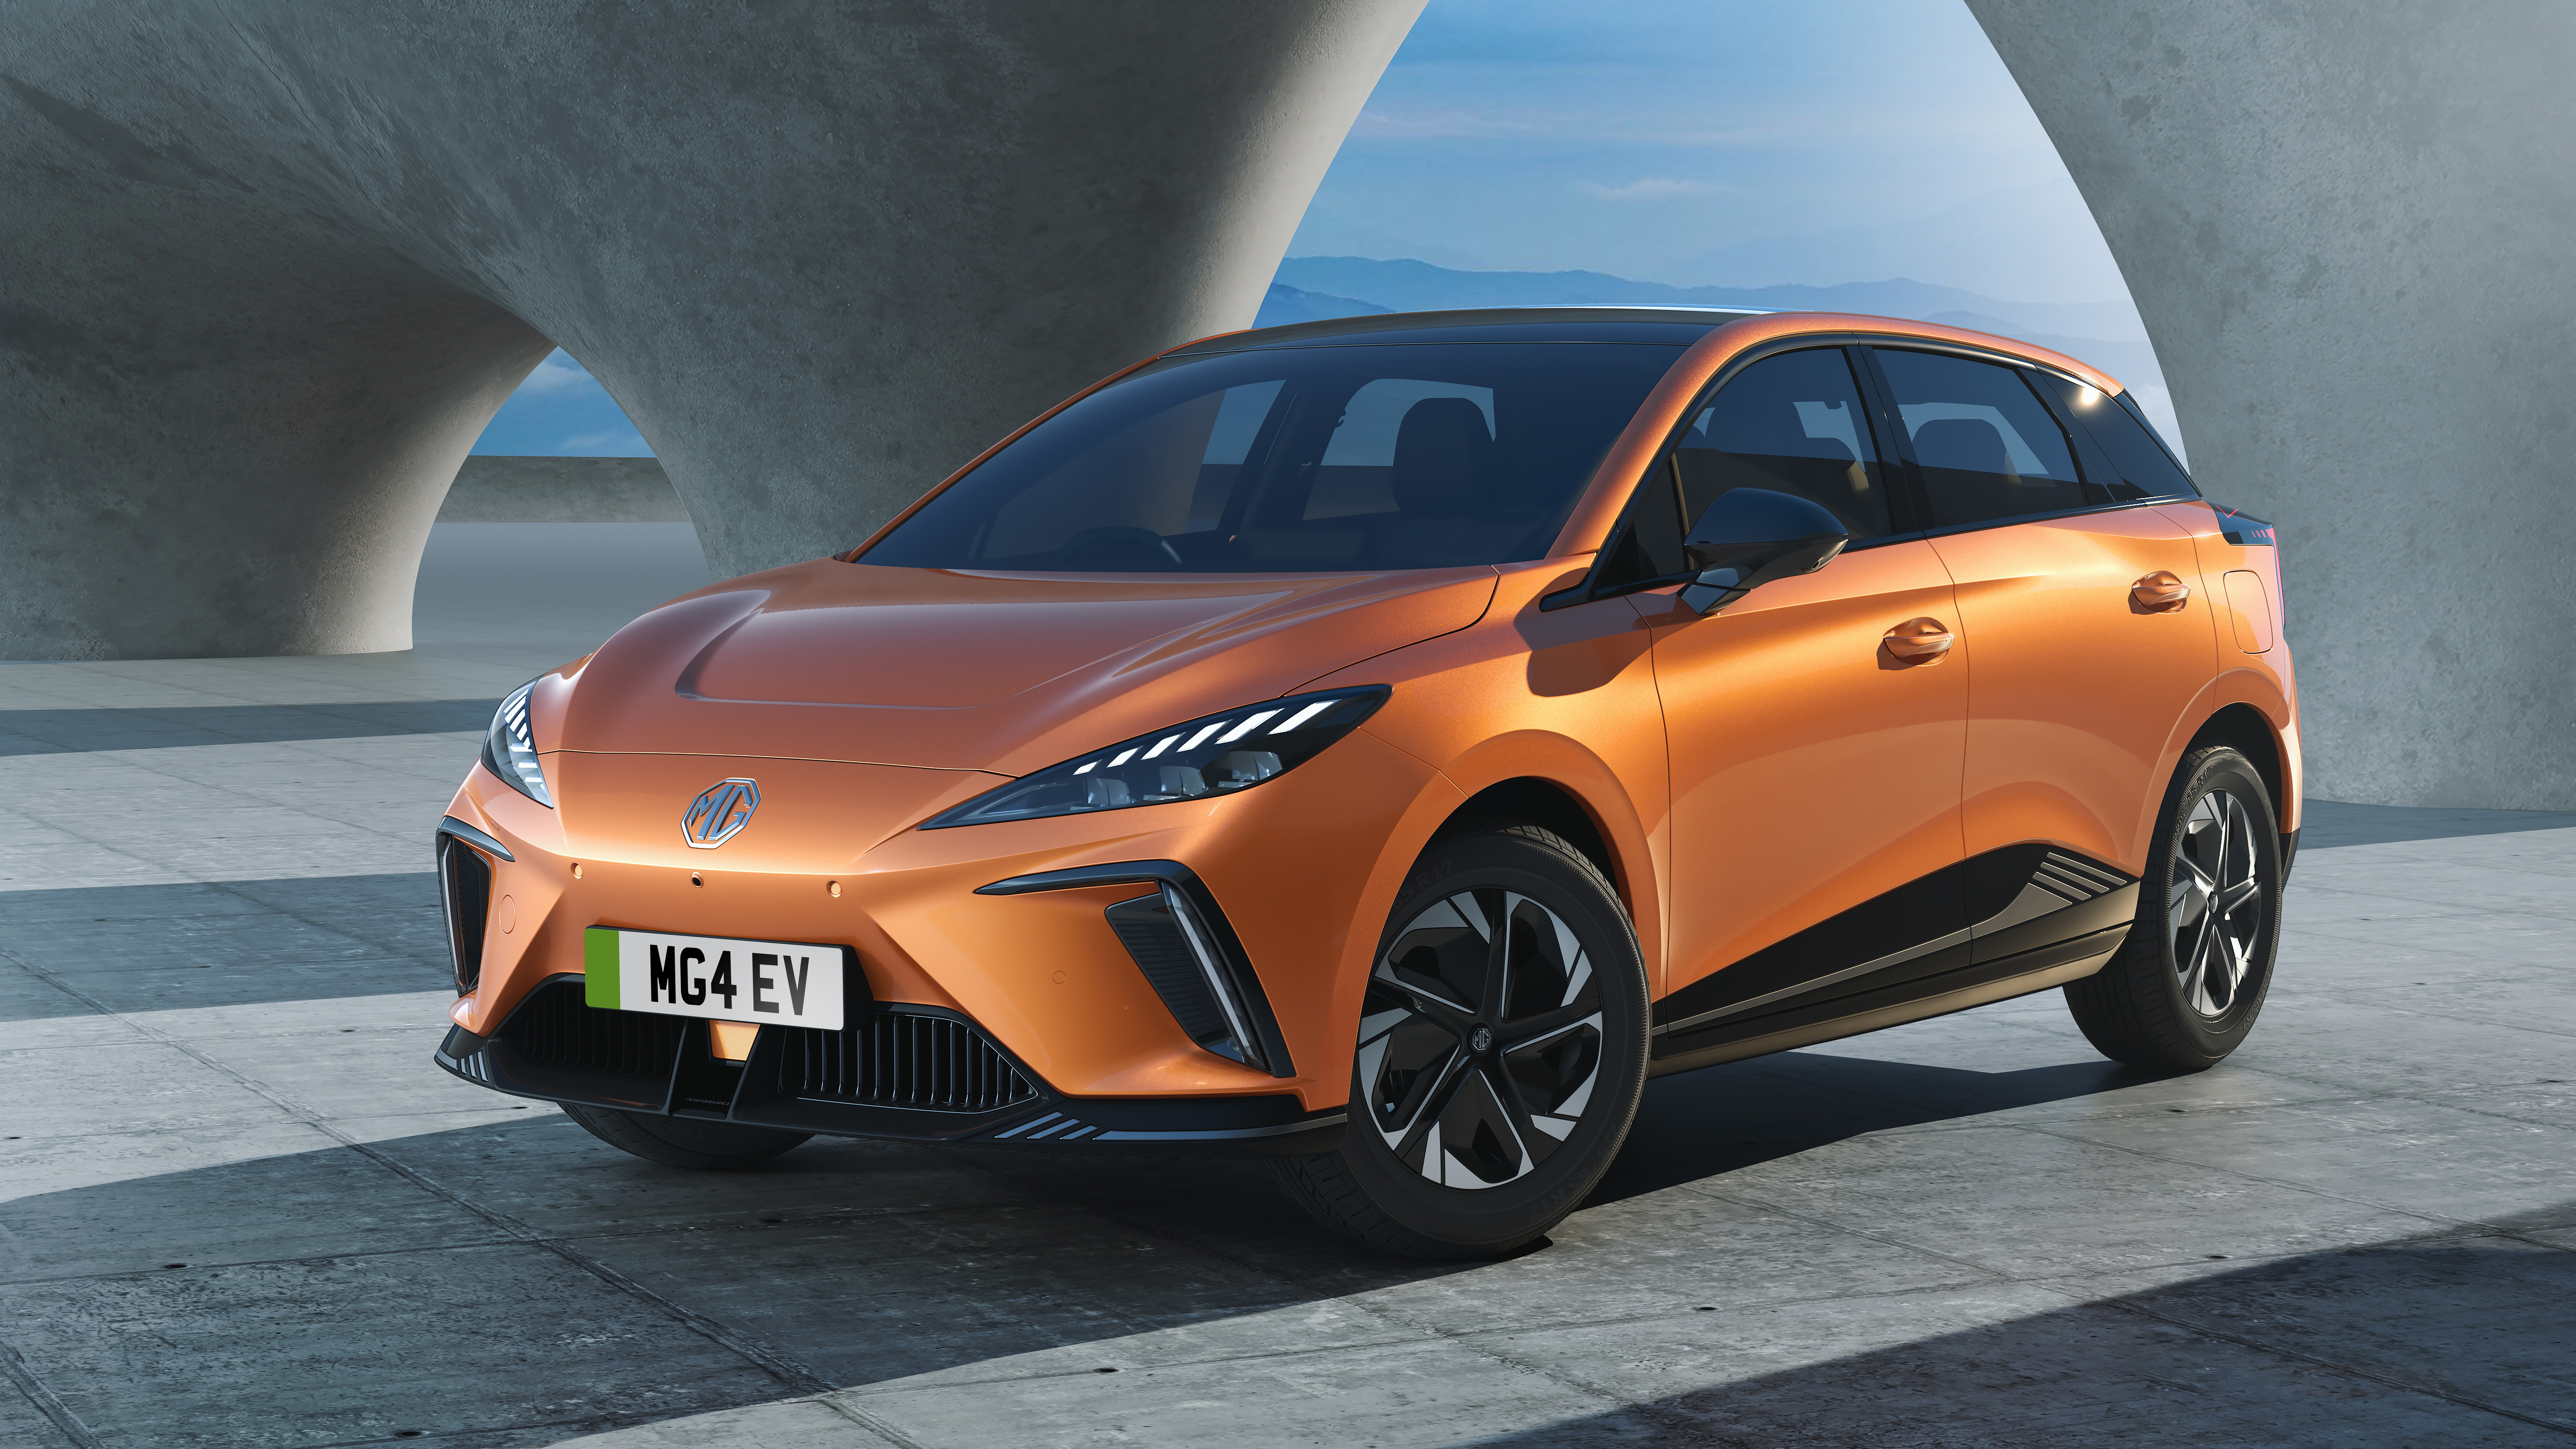 The New MG4 EV Launches in September 2022